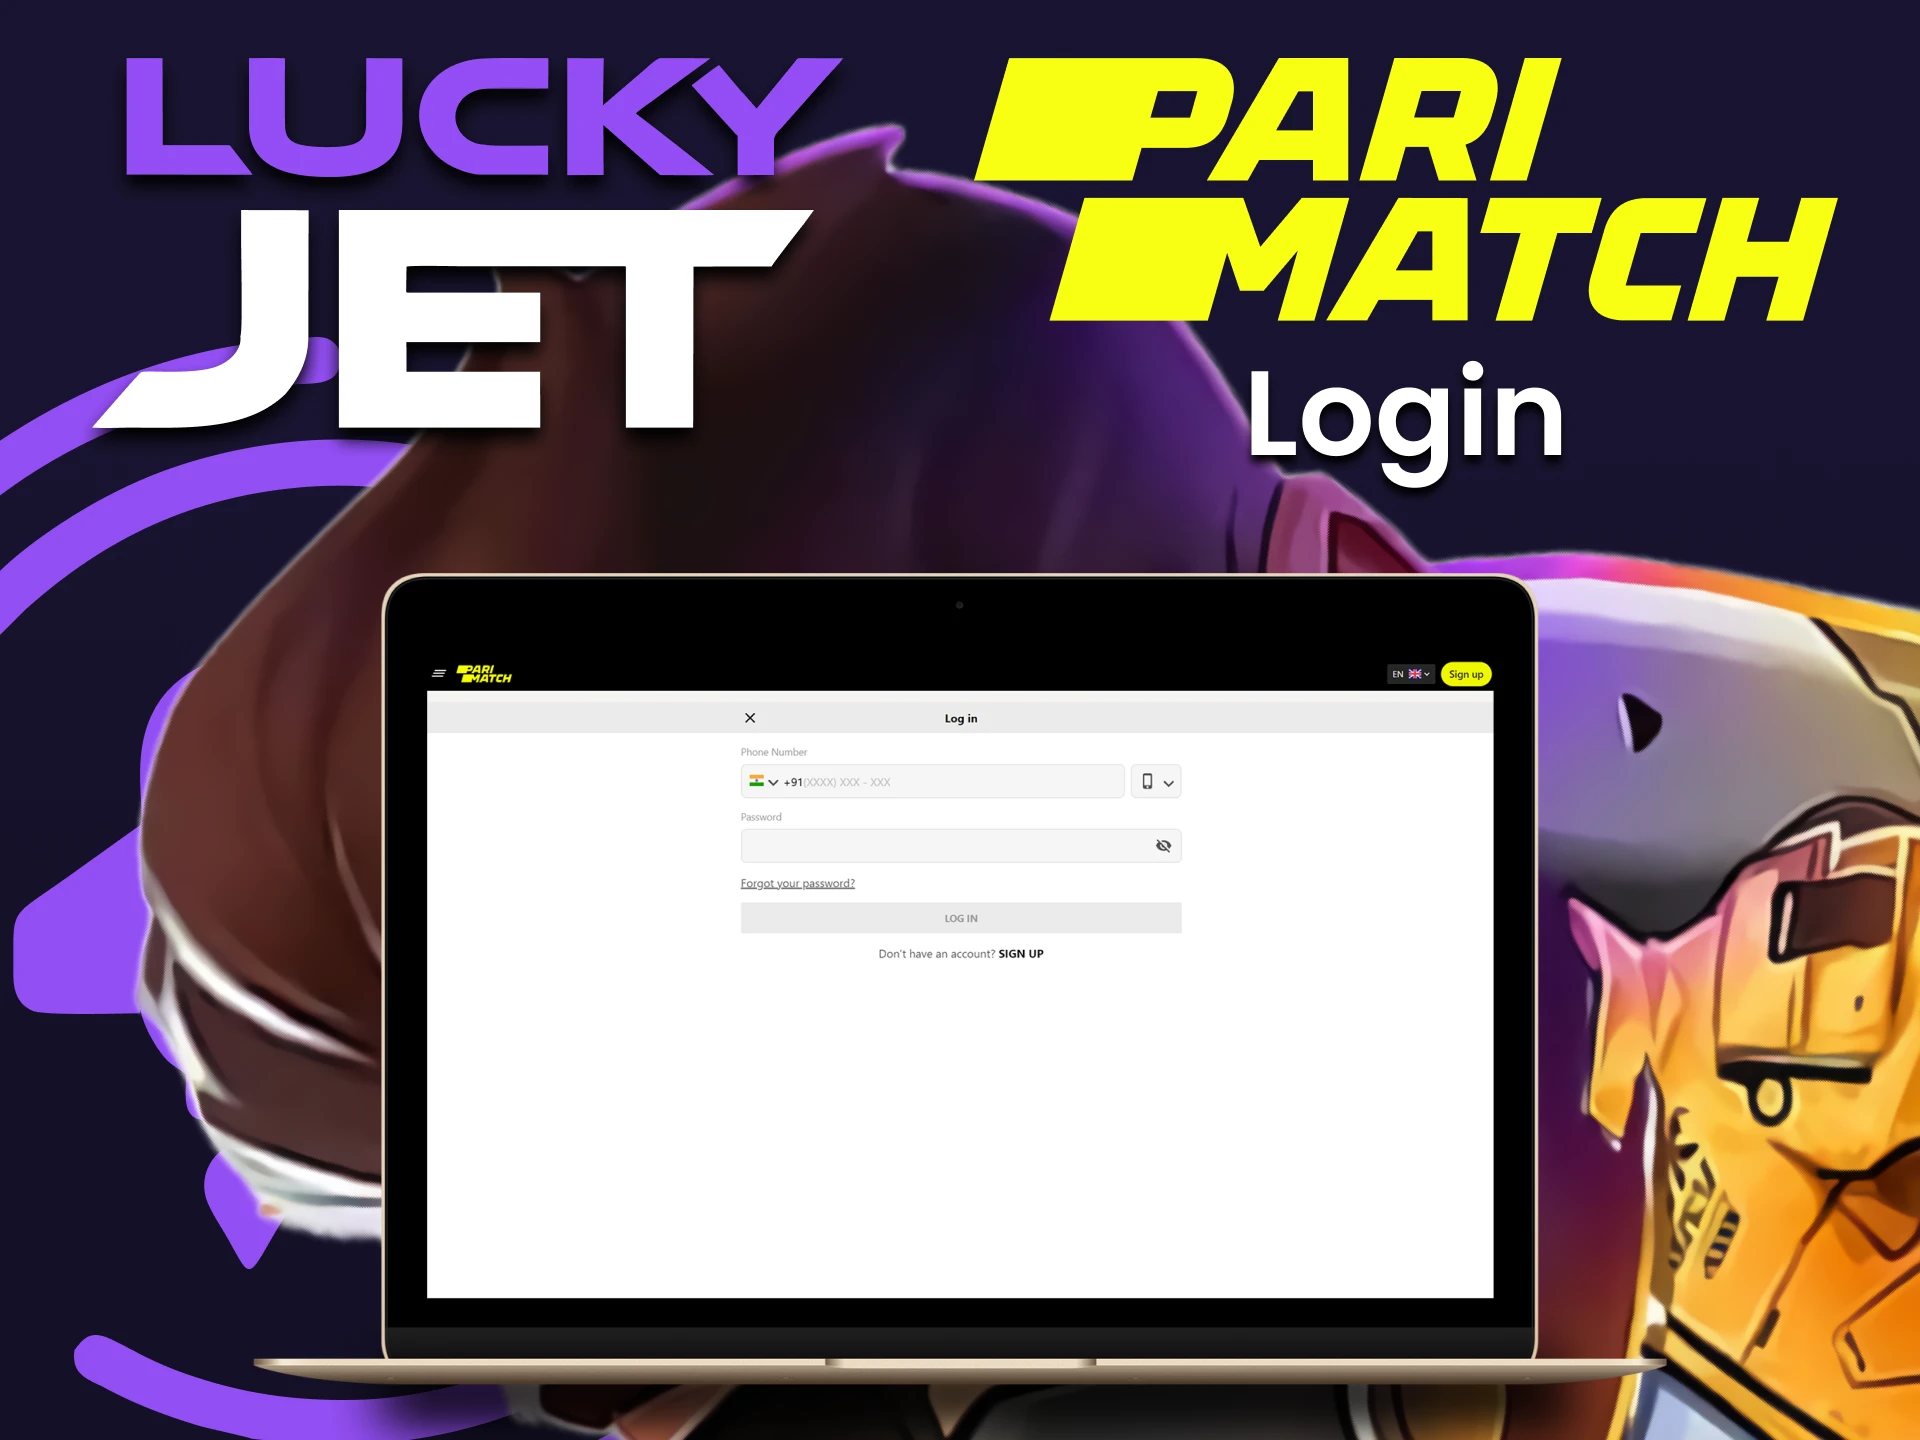 Log in to your personal Parimatch account to play Lucky Jet.